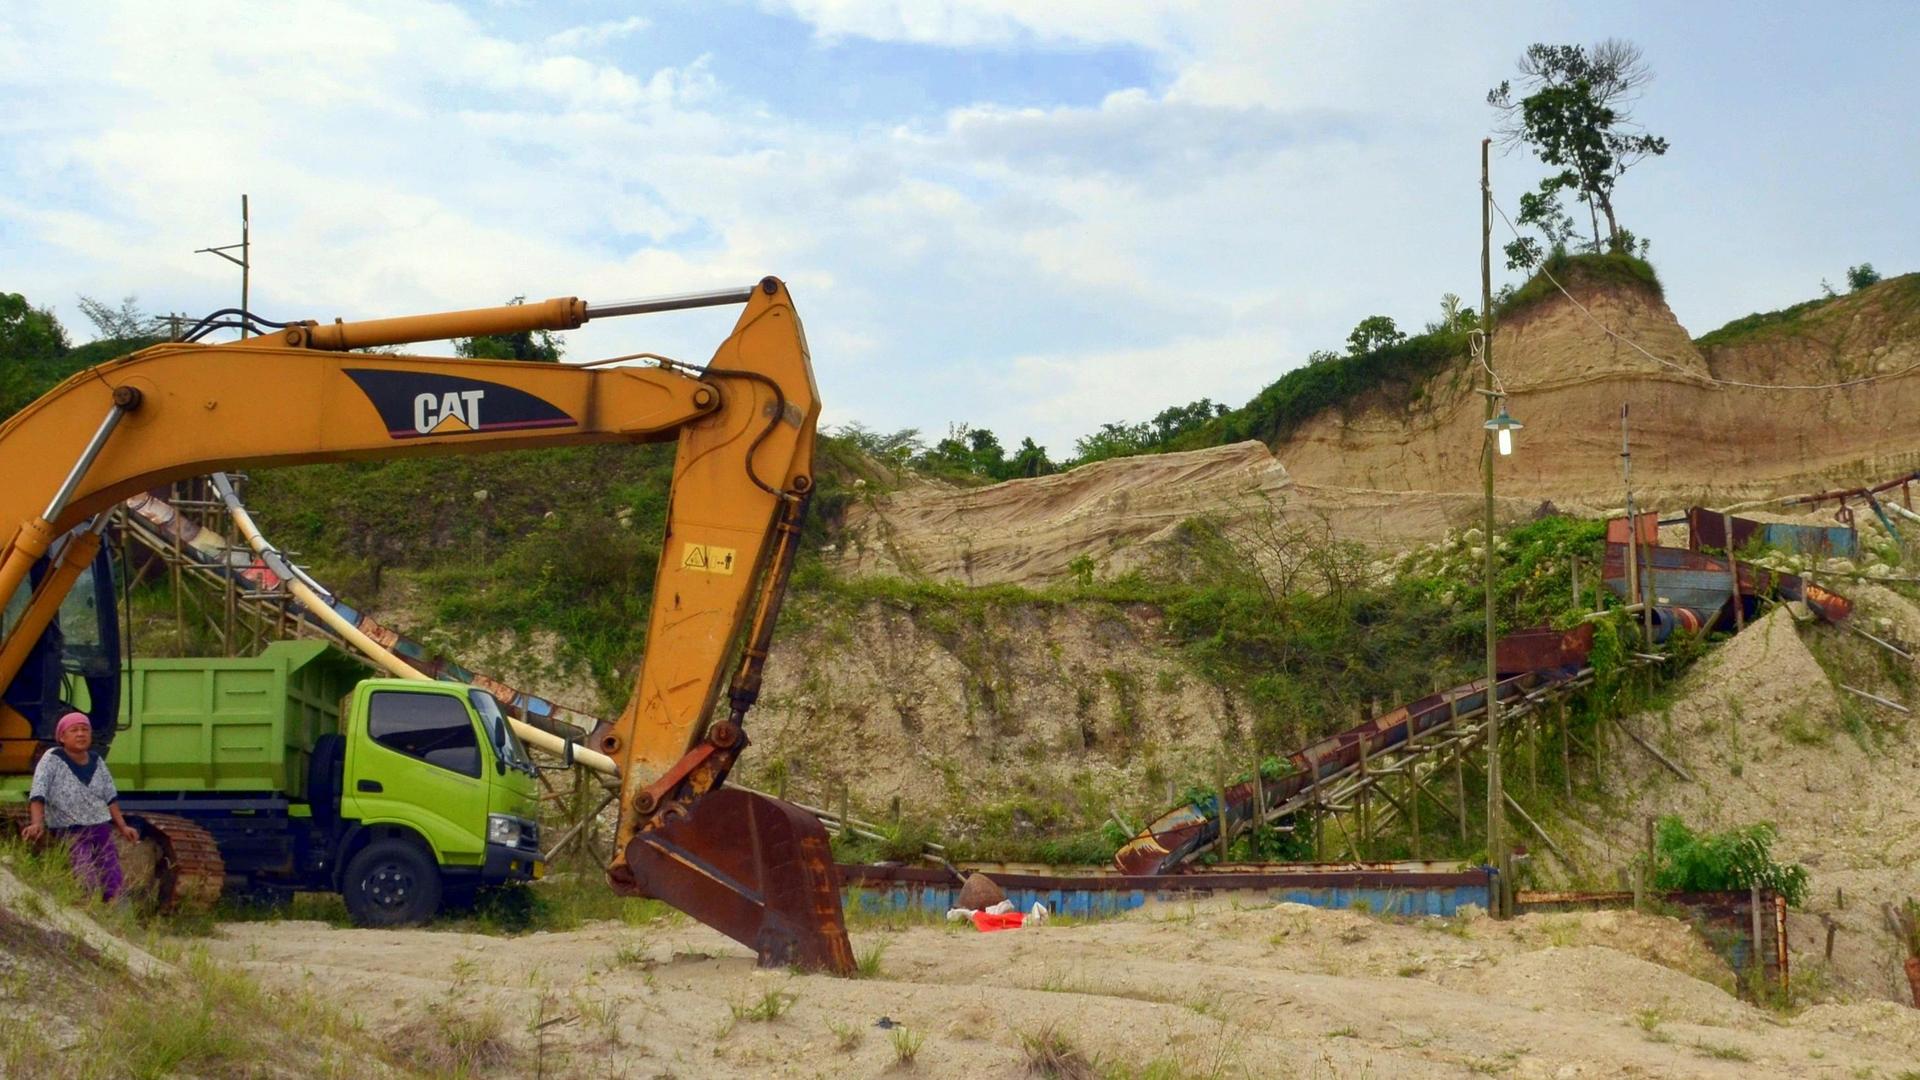 A sand mining operation in Rangkasbitung, Indonesia. A global building boom has driven soaring demand for sand for concrete and land reclamation, much of it illegal and damaging to ecosystems and communities.